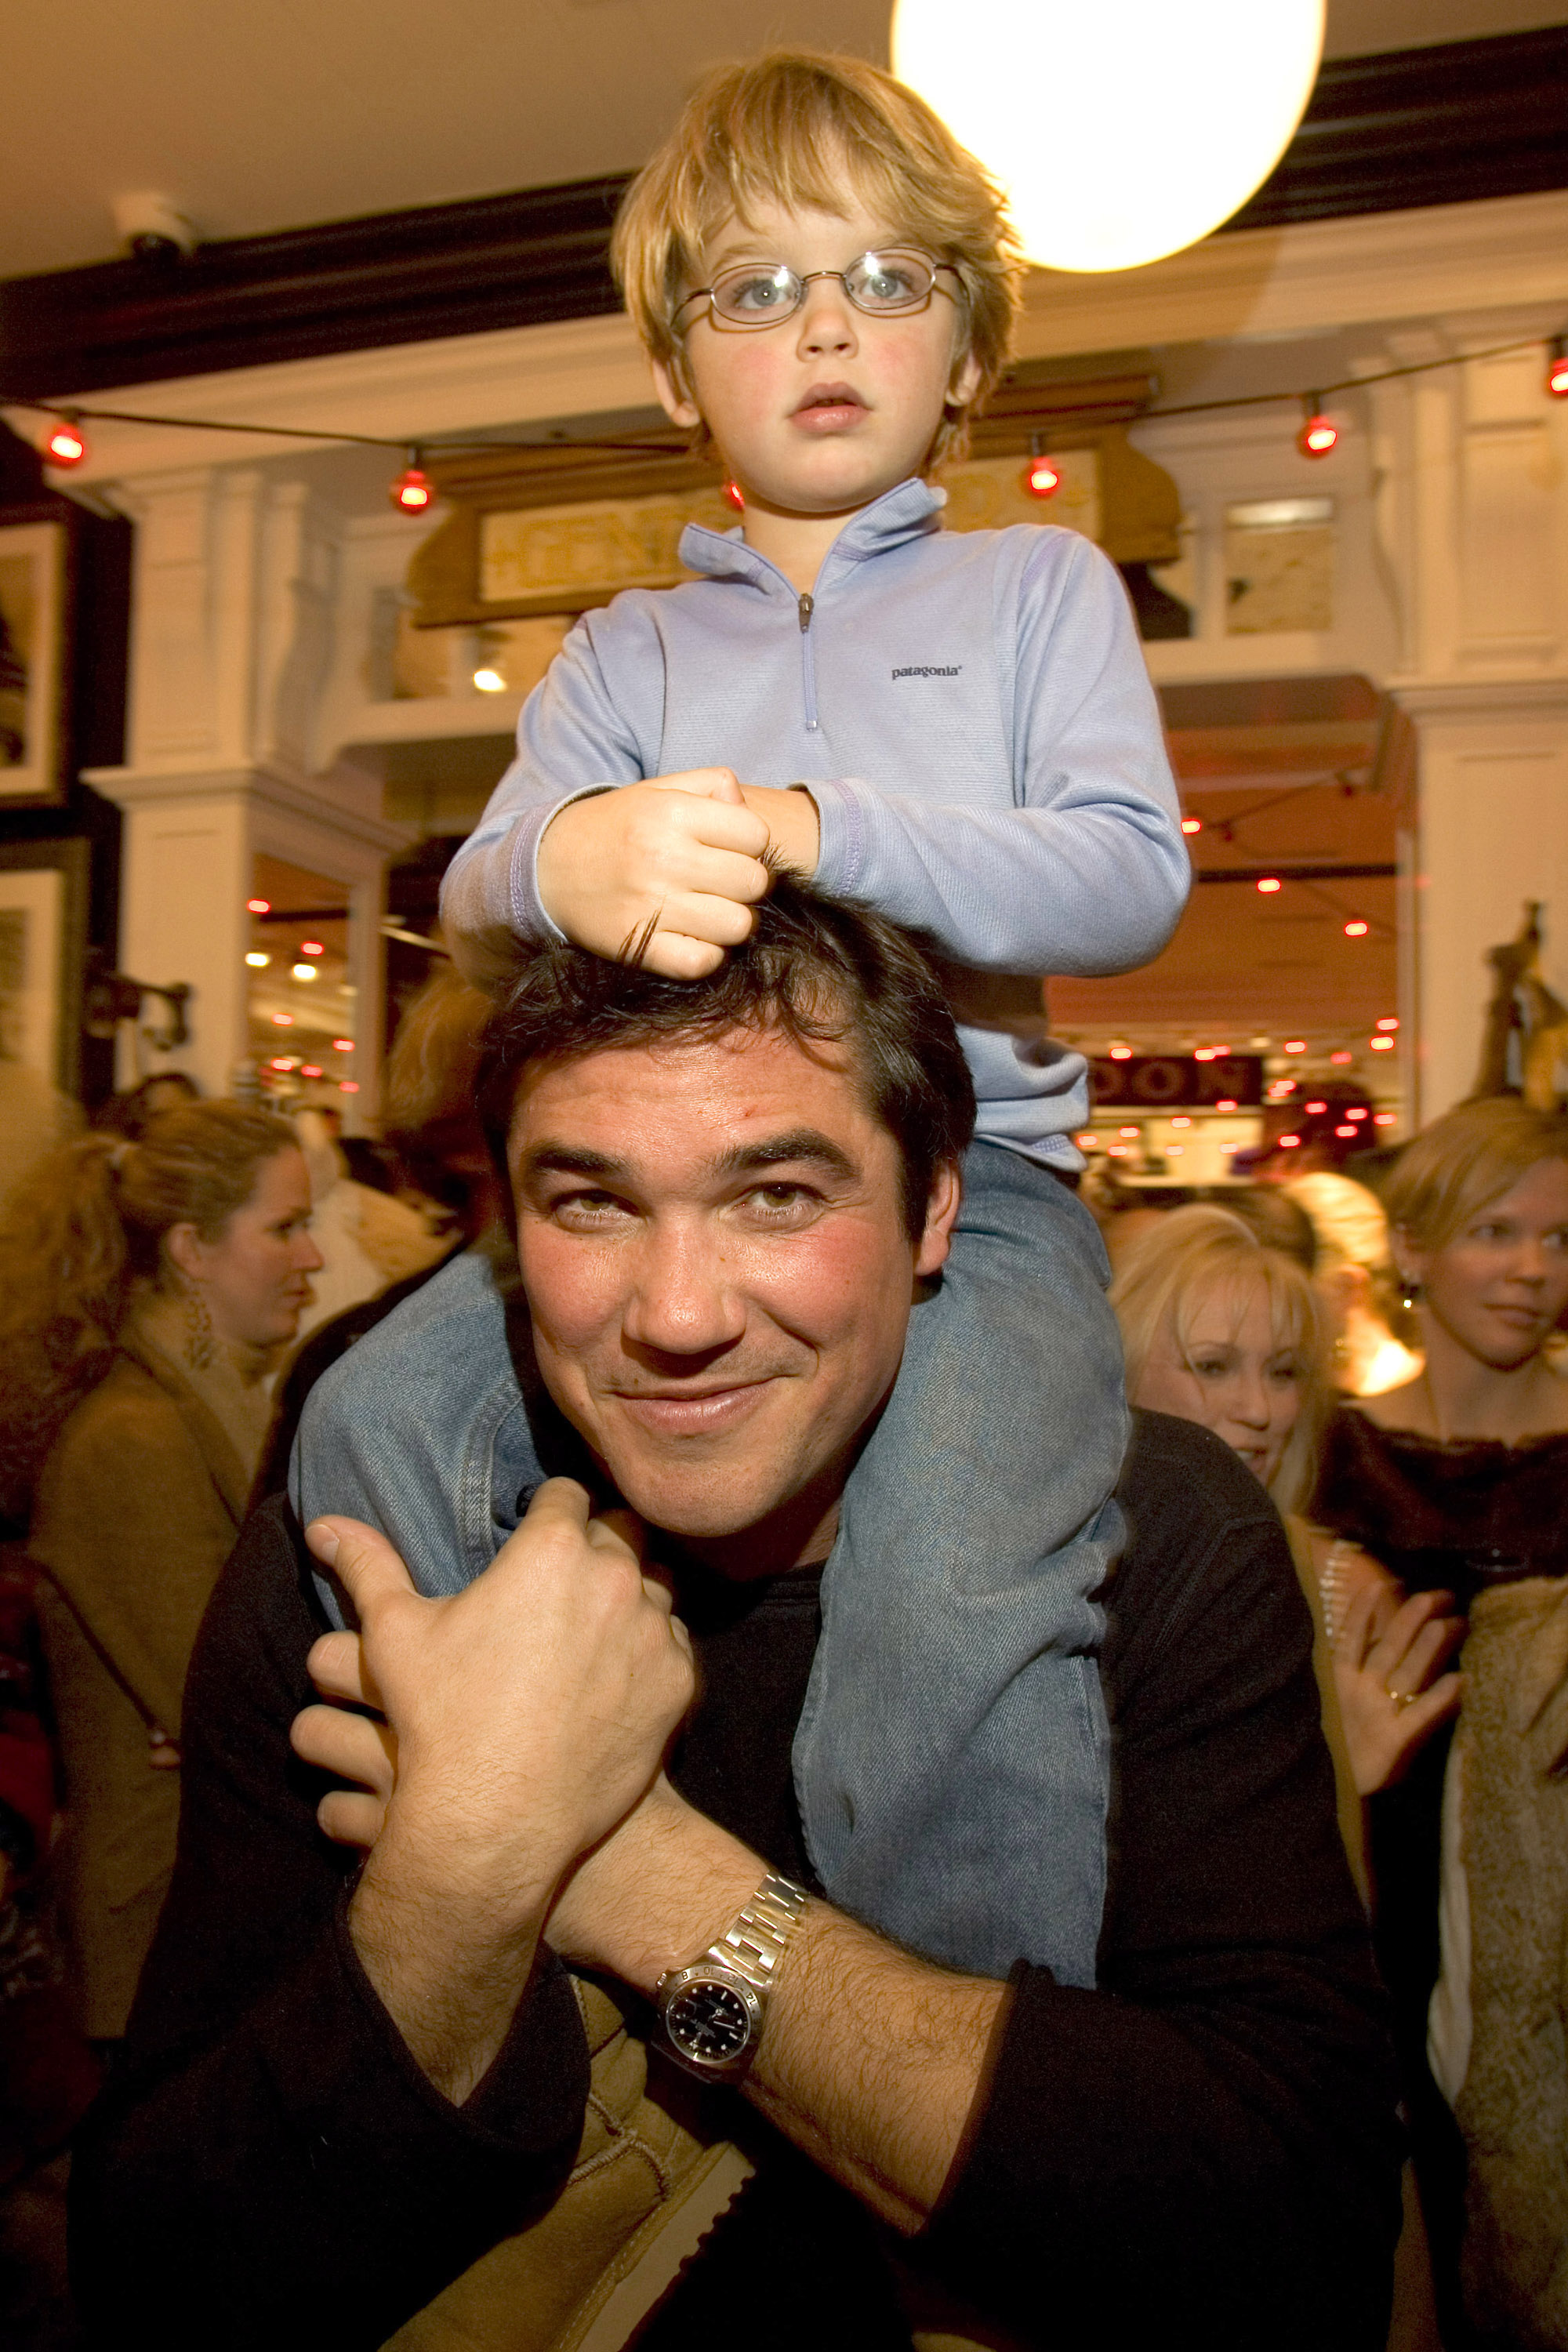 Christopher and Dean Cain during the Aspen Peak at the Opening of The New Ralph Lauren Aspen Store in Aspen, Colorado, on December 30, 2004 | Source: Getty Images